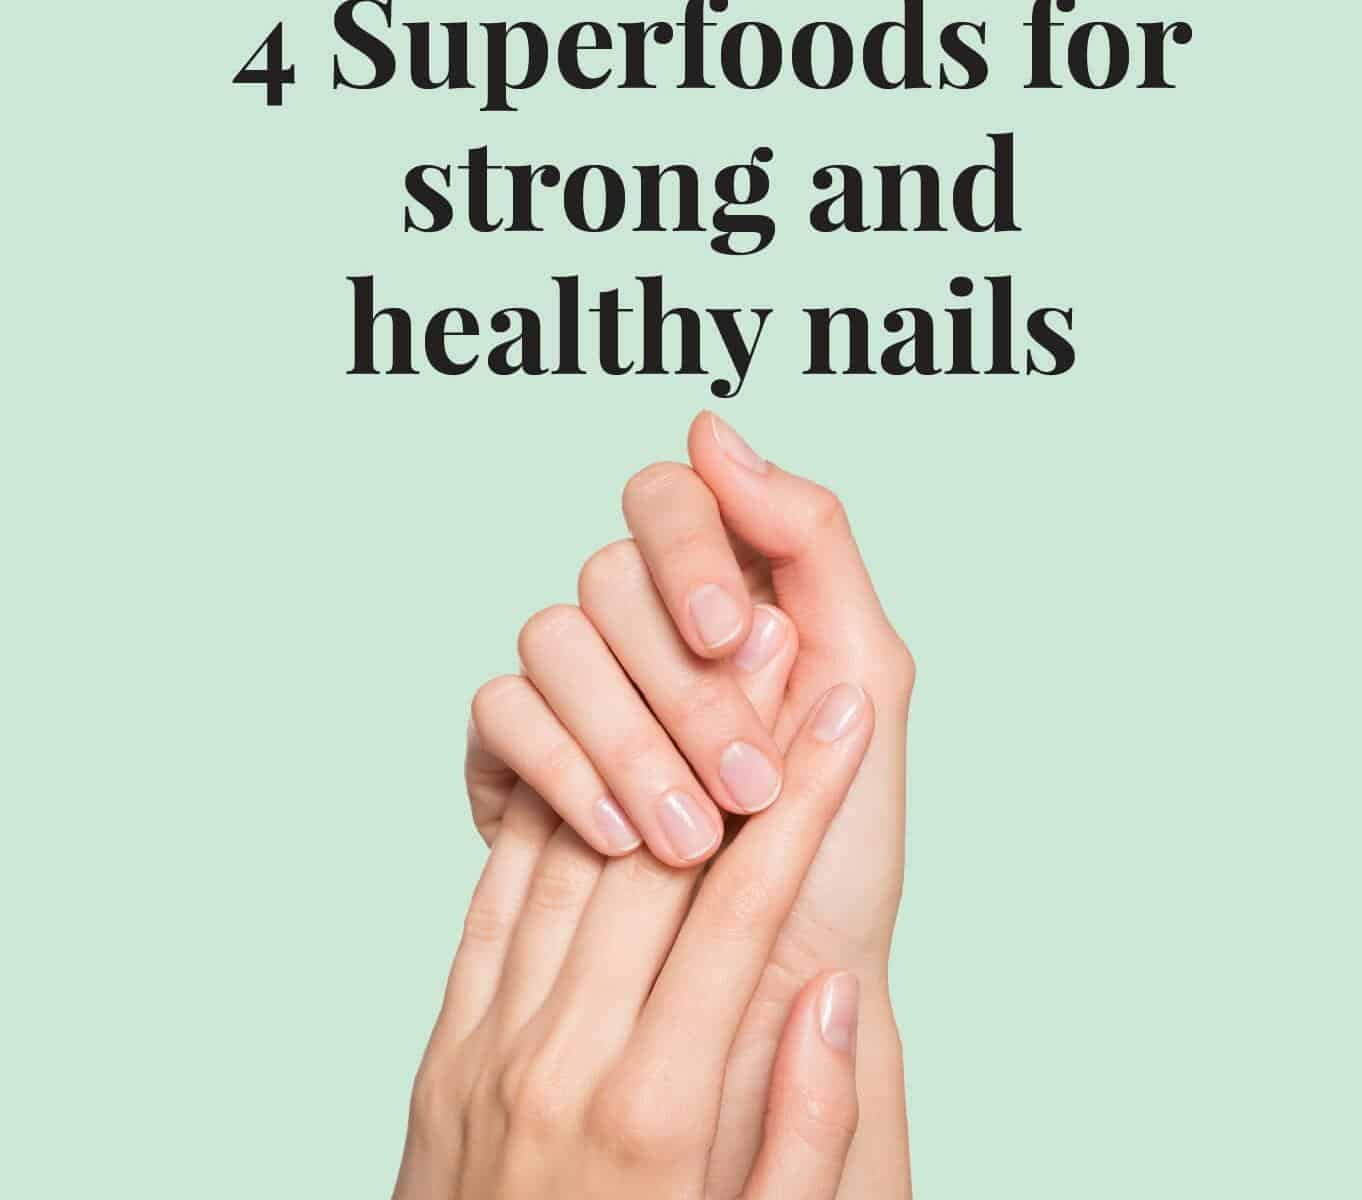 4 Super Foods for Strong and Healthy Nails